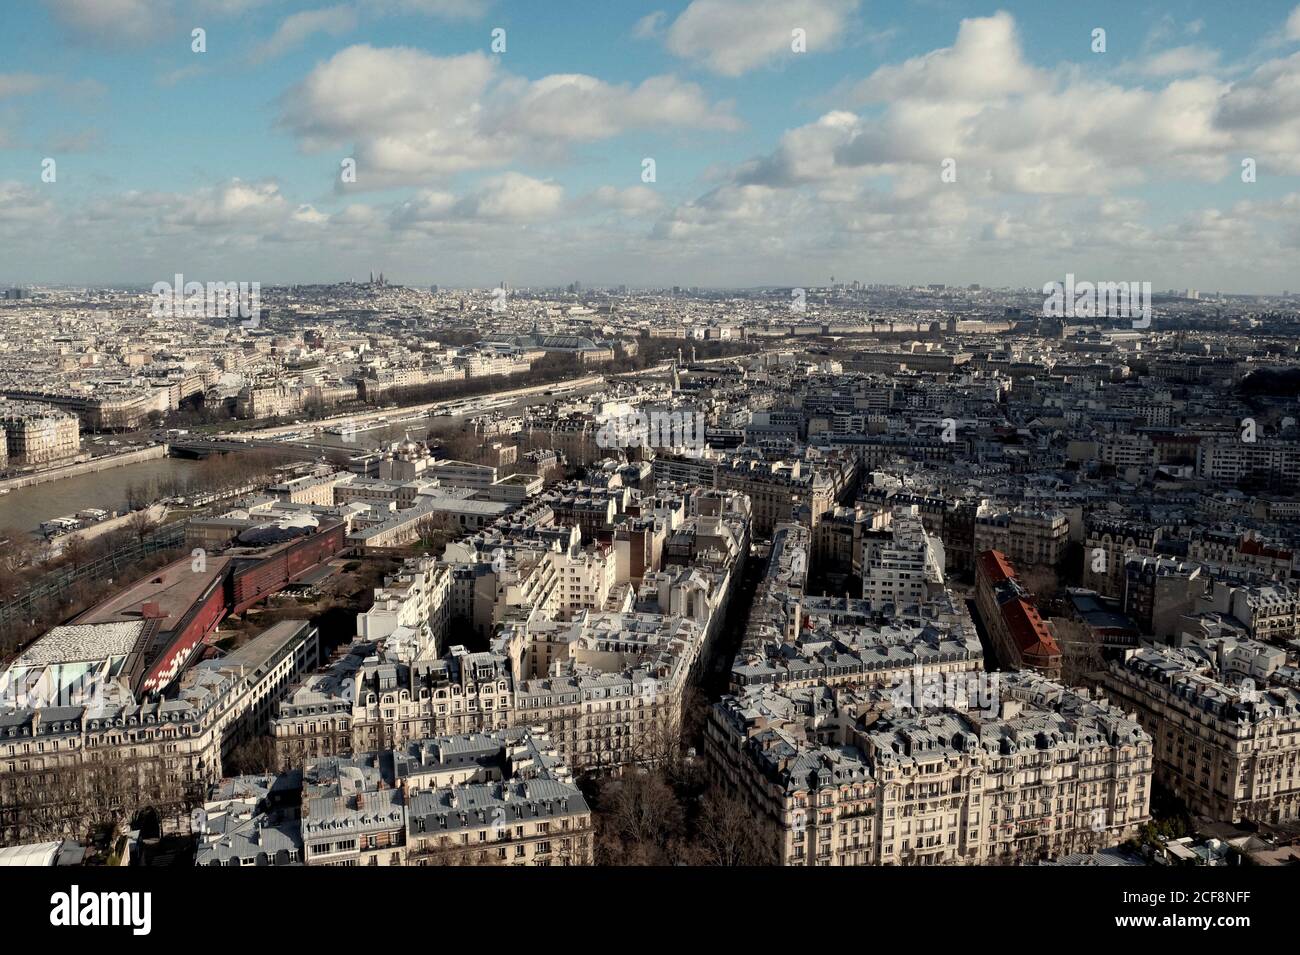 View of Paris from the top of the Eiffel Tower Stock Photo